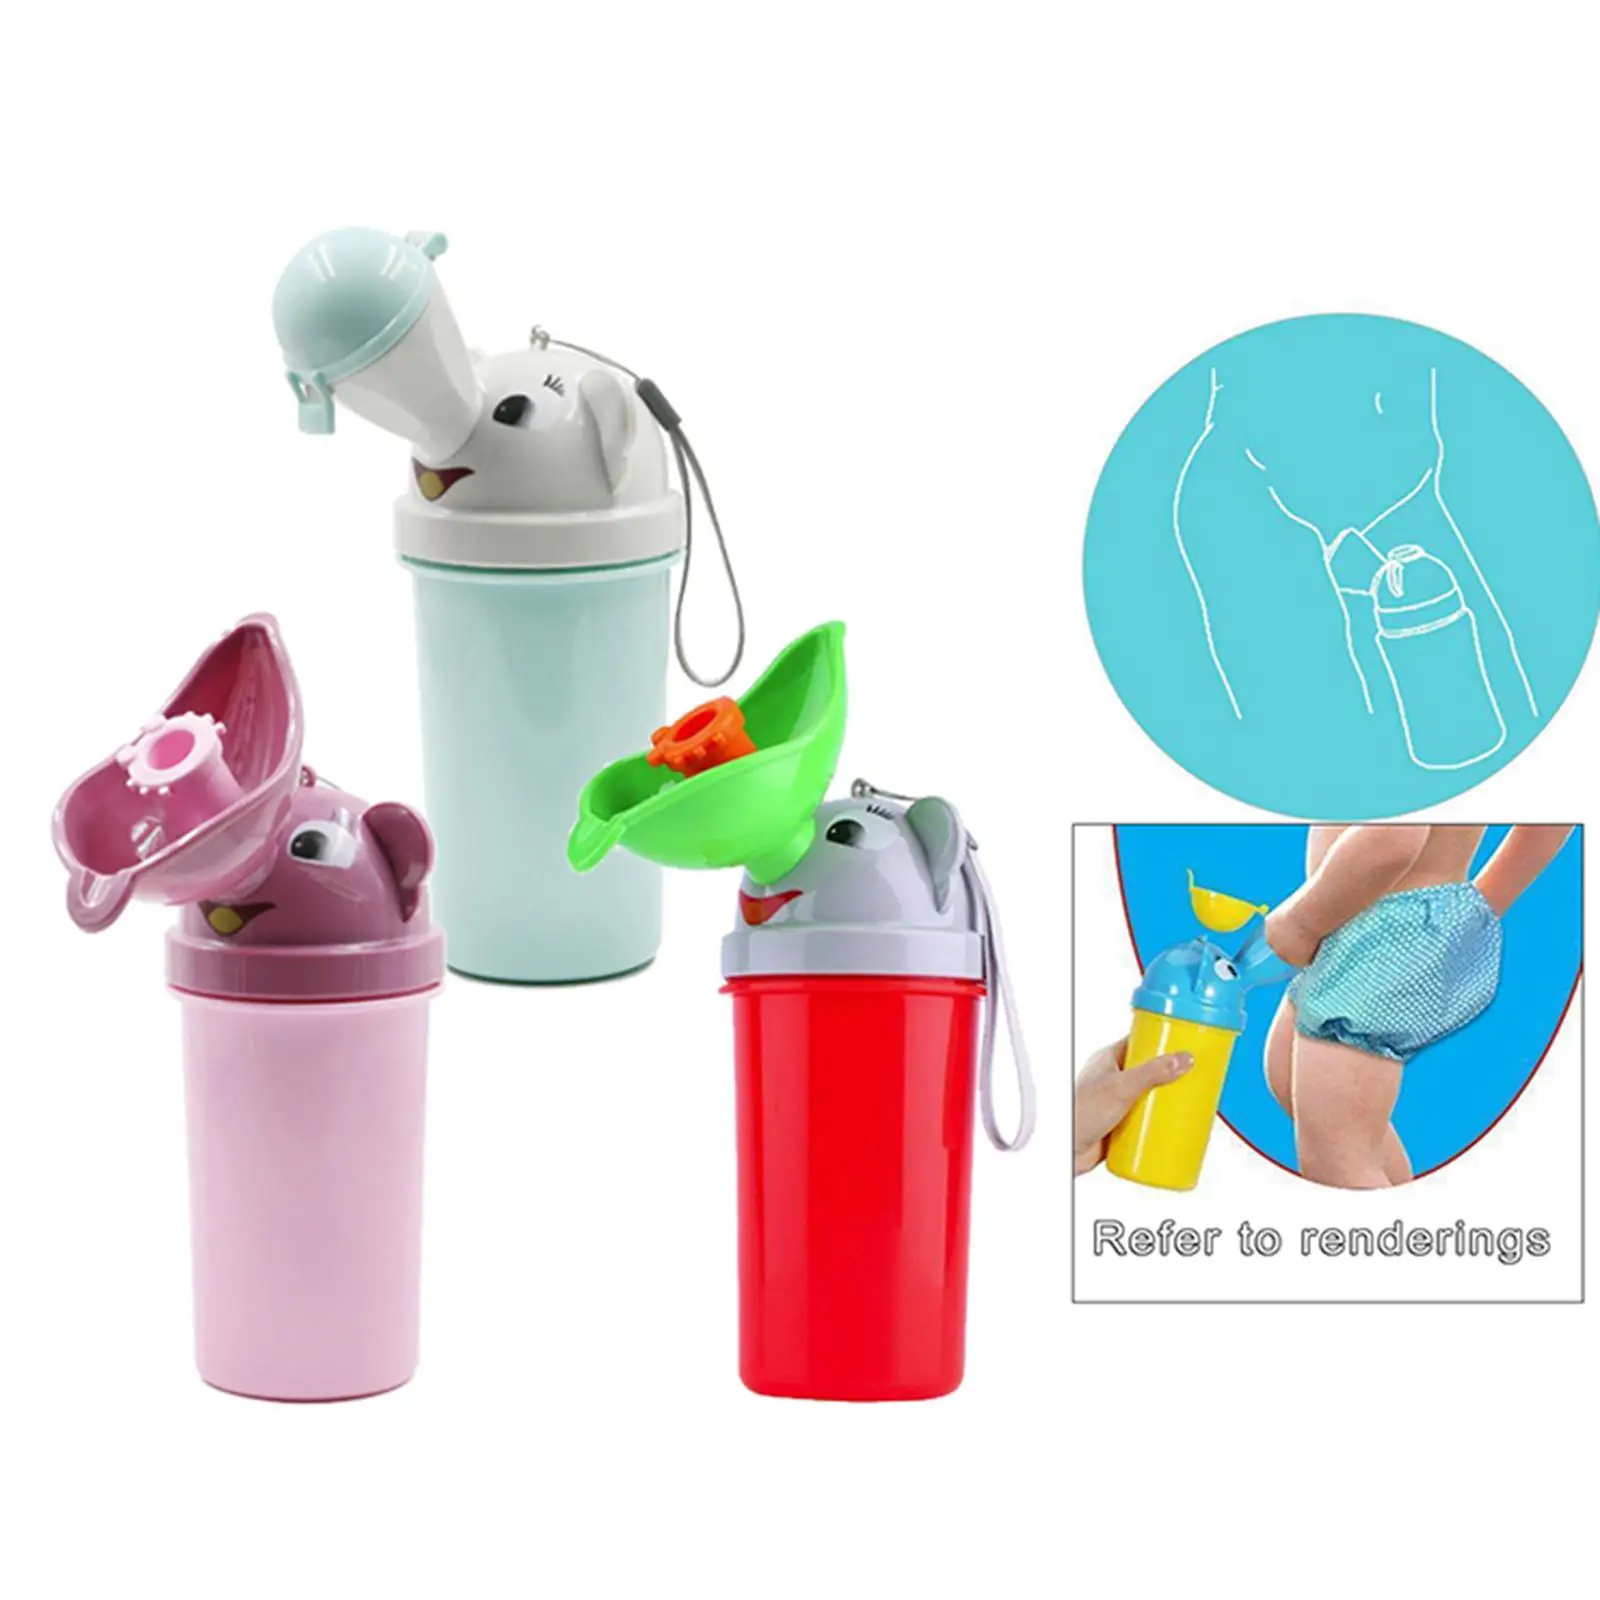 Hygiene Travel Urinal Potty Convenient Toilet Pee Bottle Cup for Kids Boys Girls Trip Camping